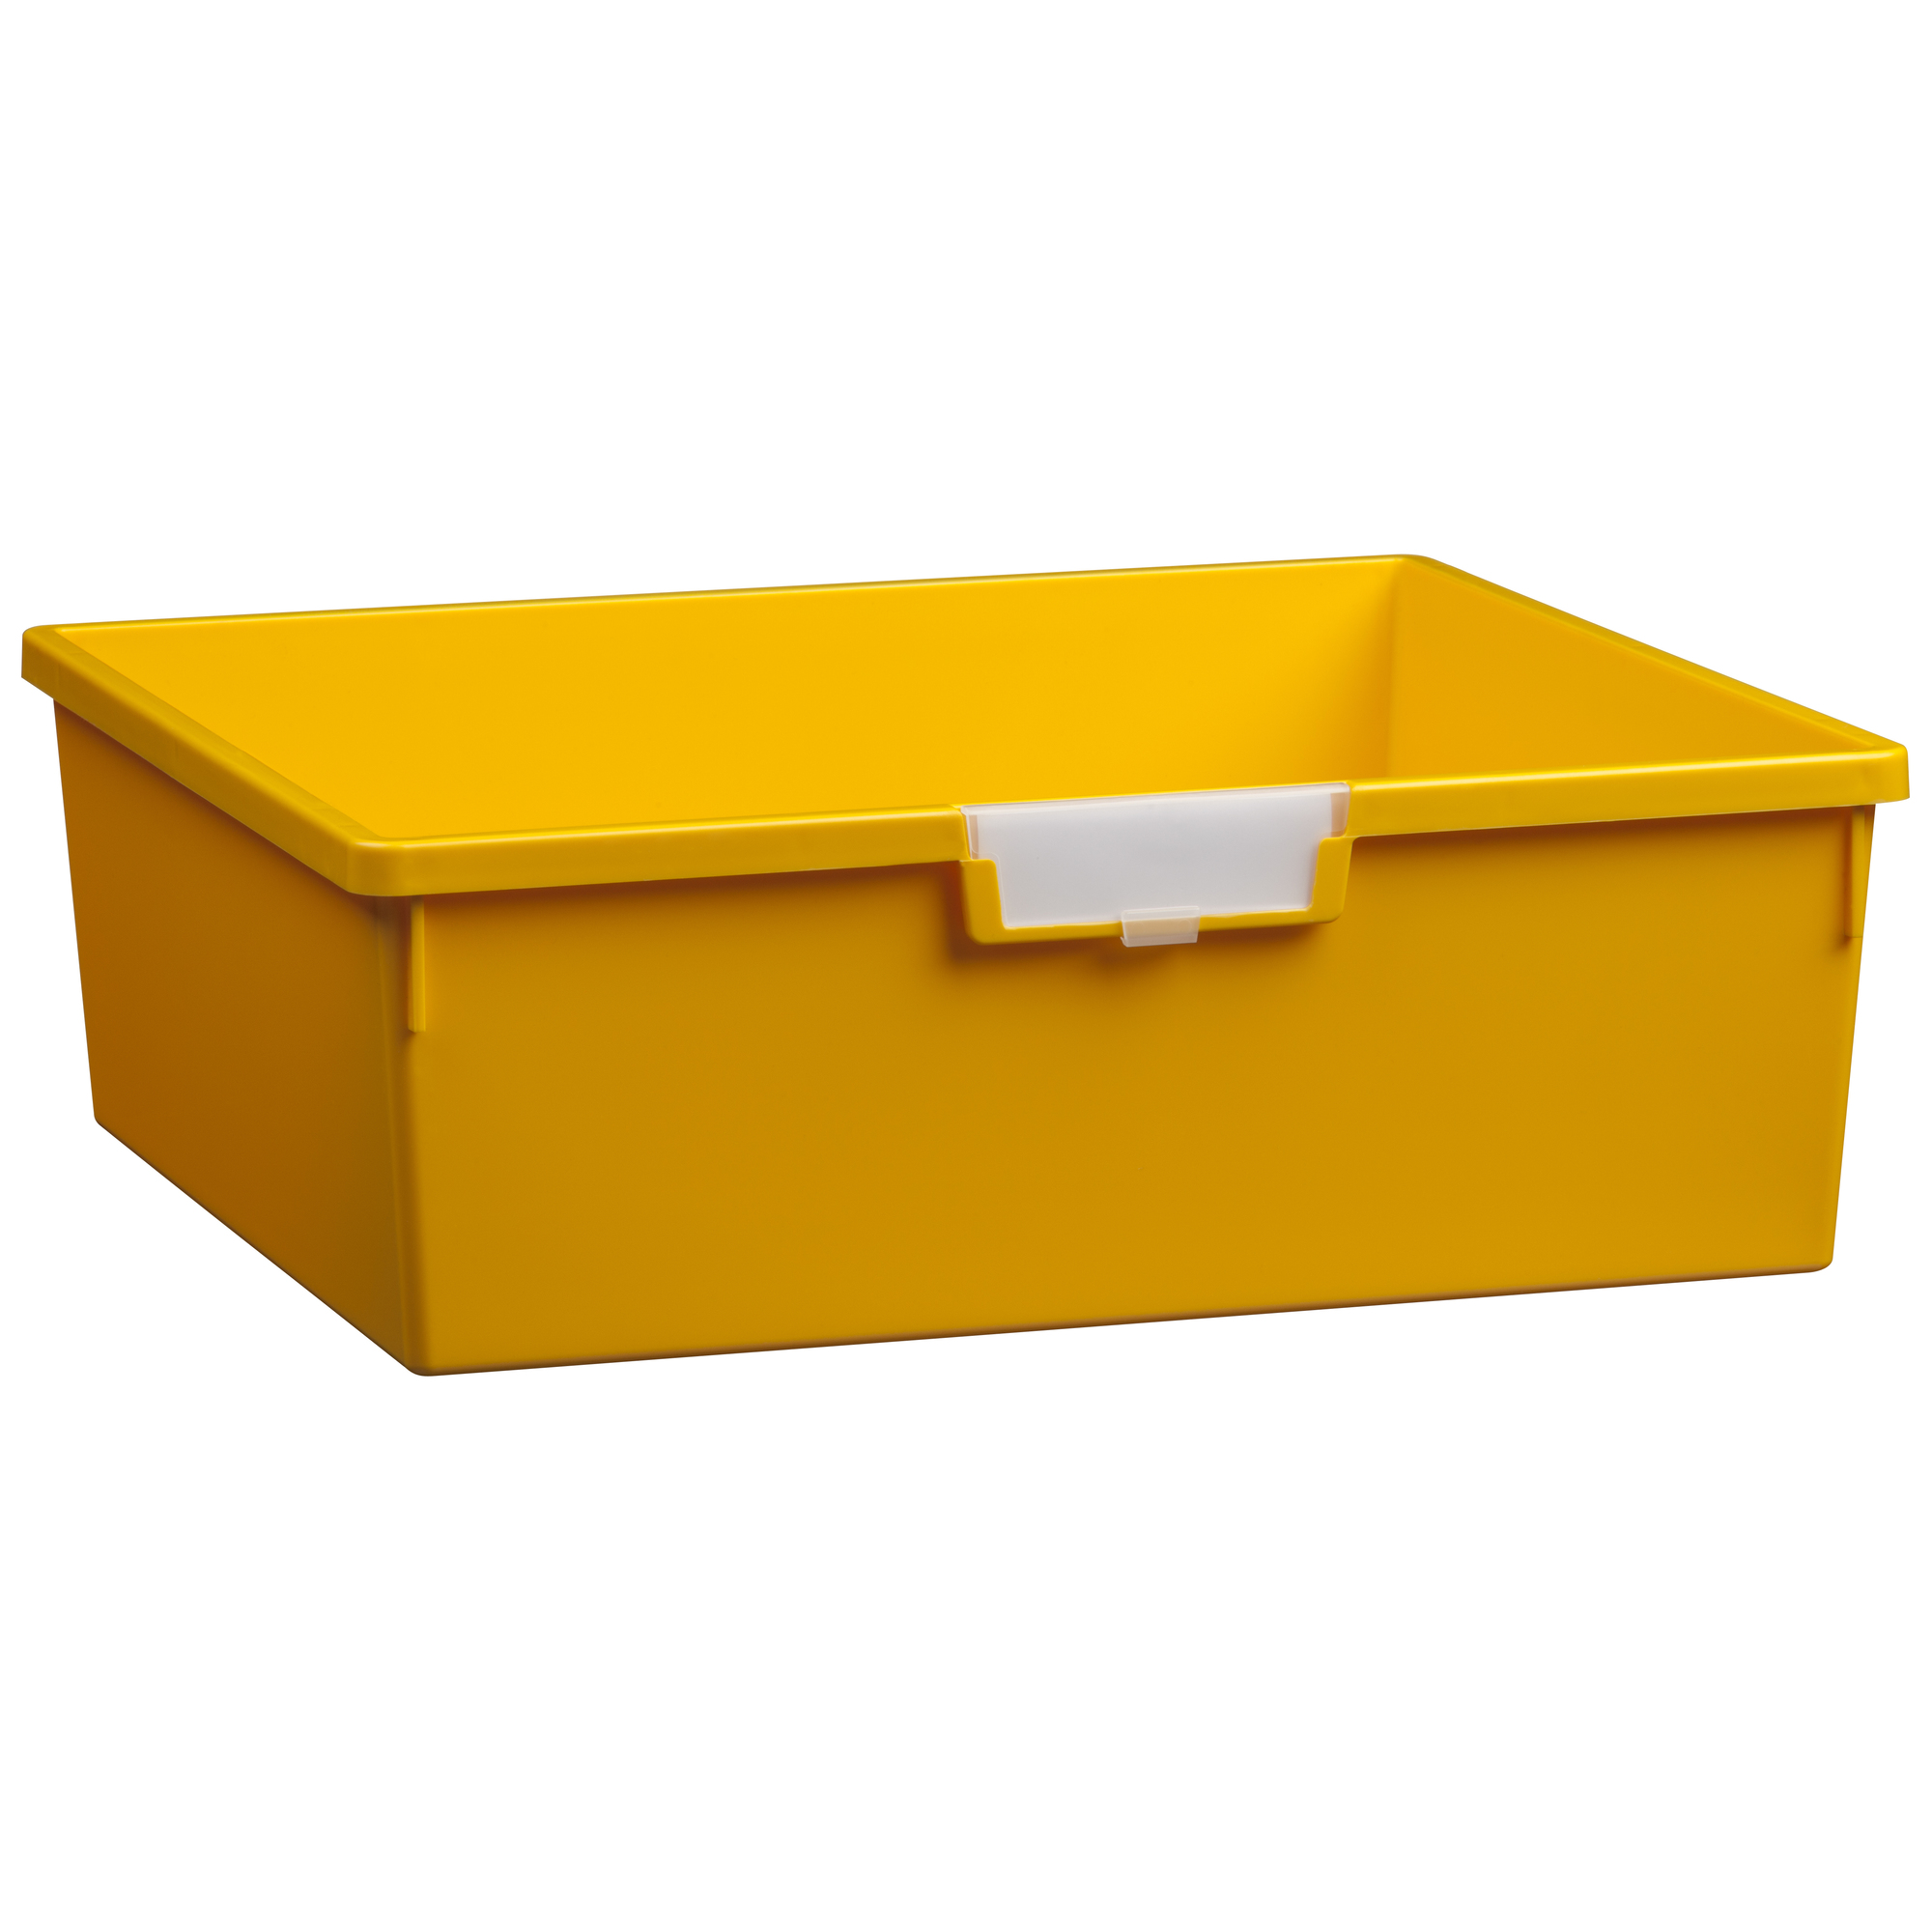 Certwood StorWerks, Wide Line 6Inch Tray in Primary Yellow-3PK, Included (qty.) 3, Material Plastic, Height 6 in, Model CE1958PY3